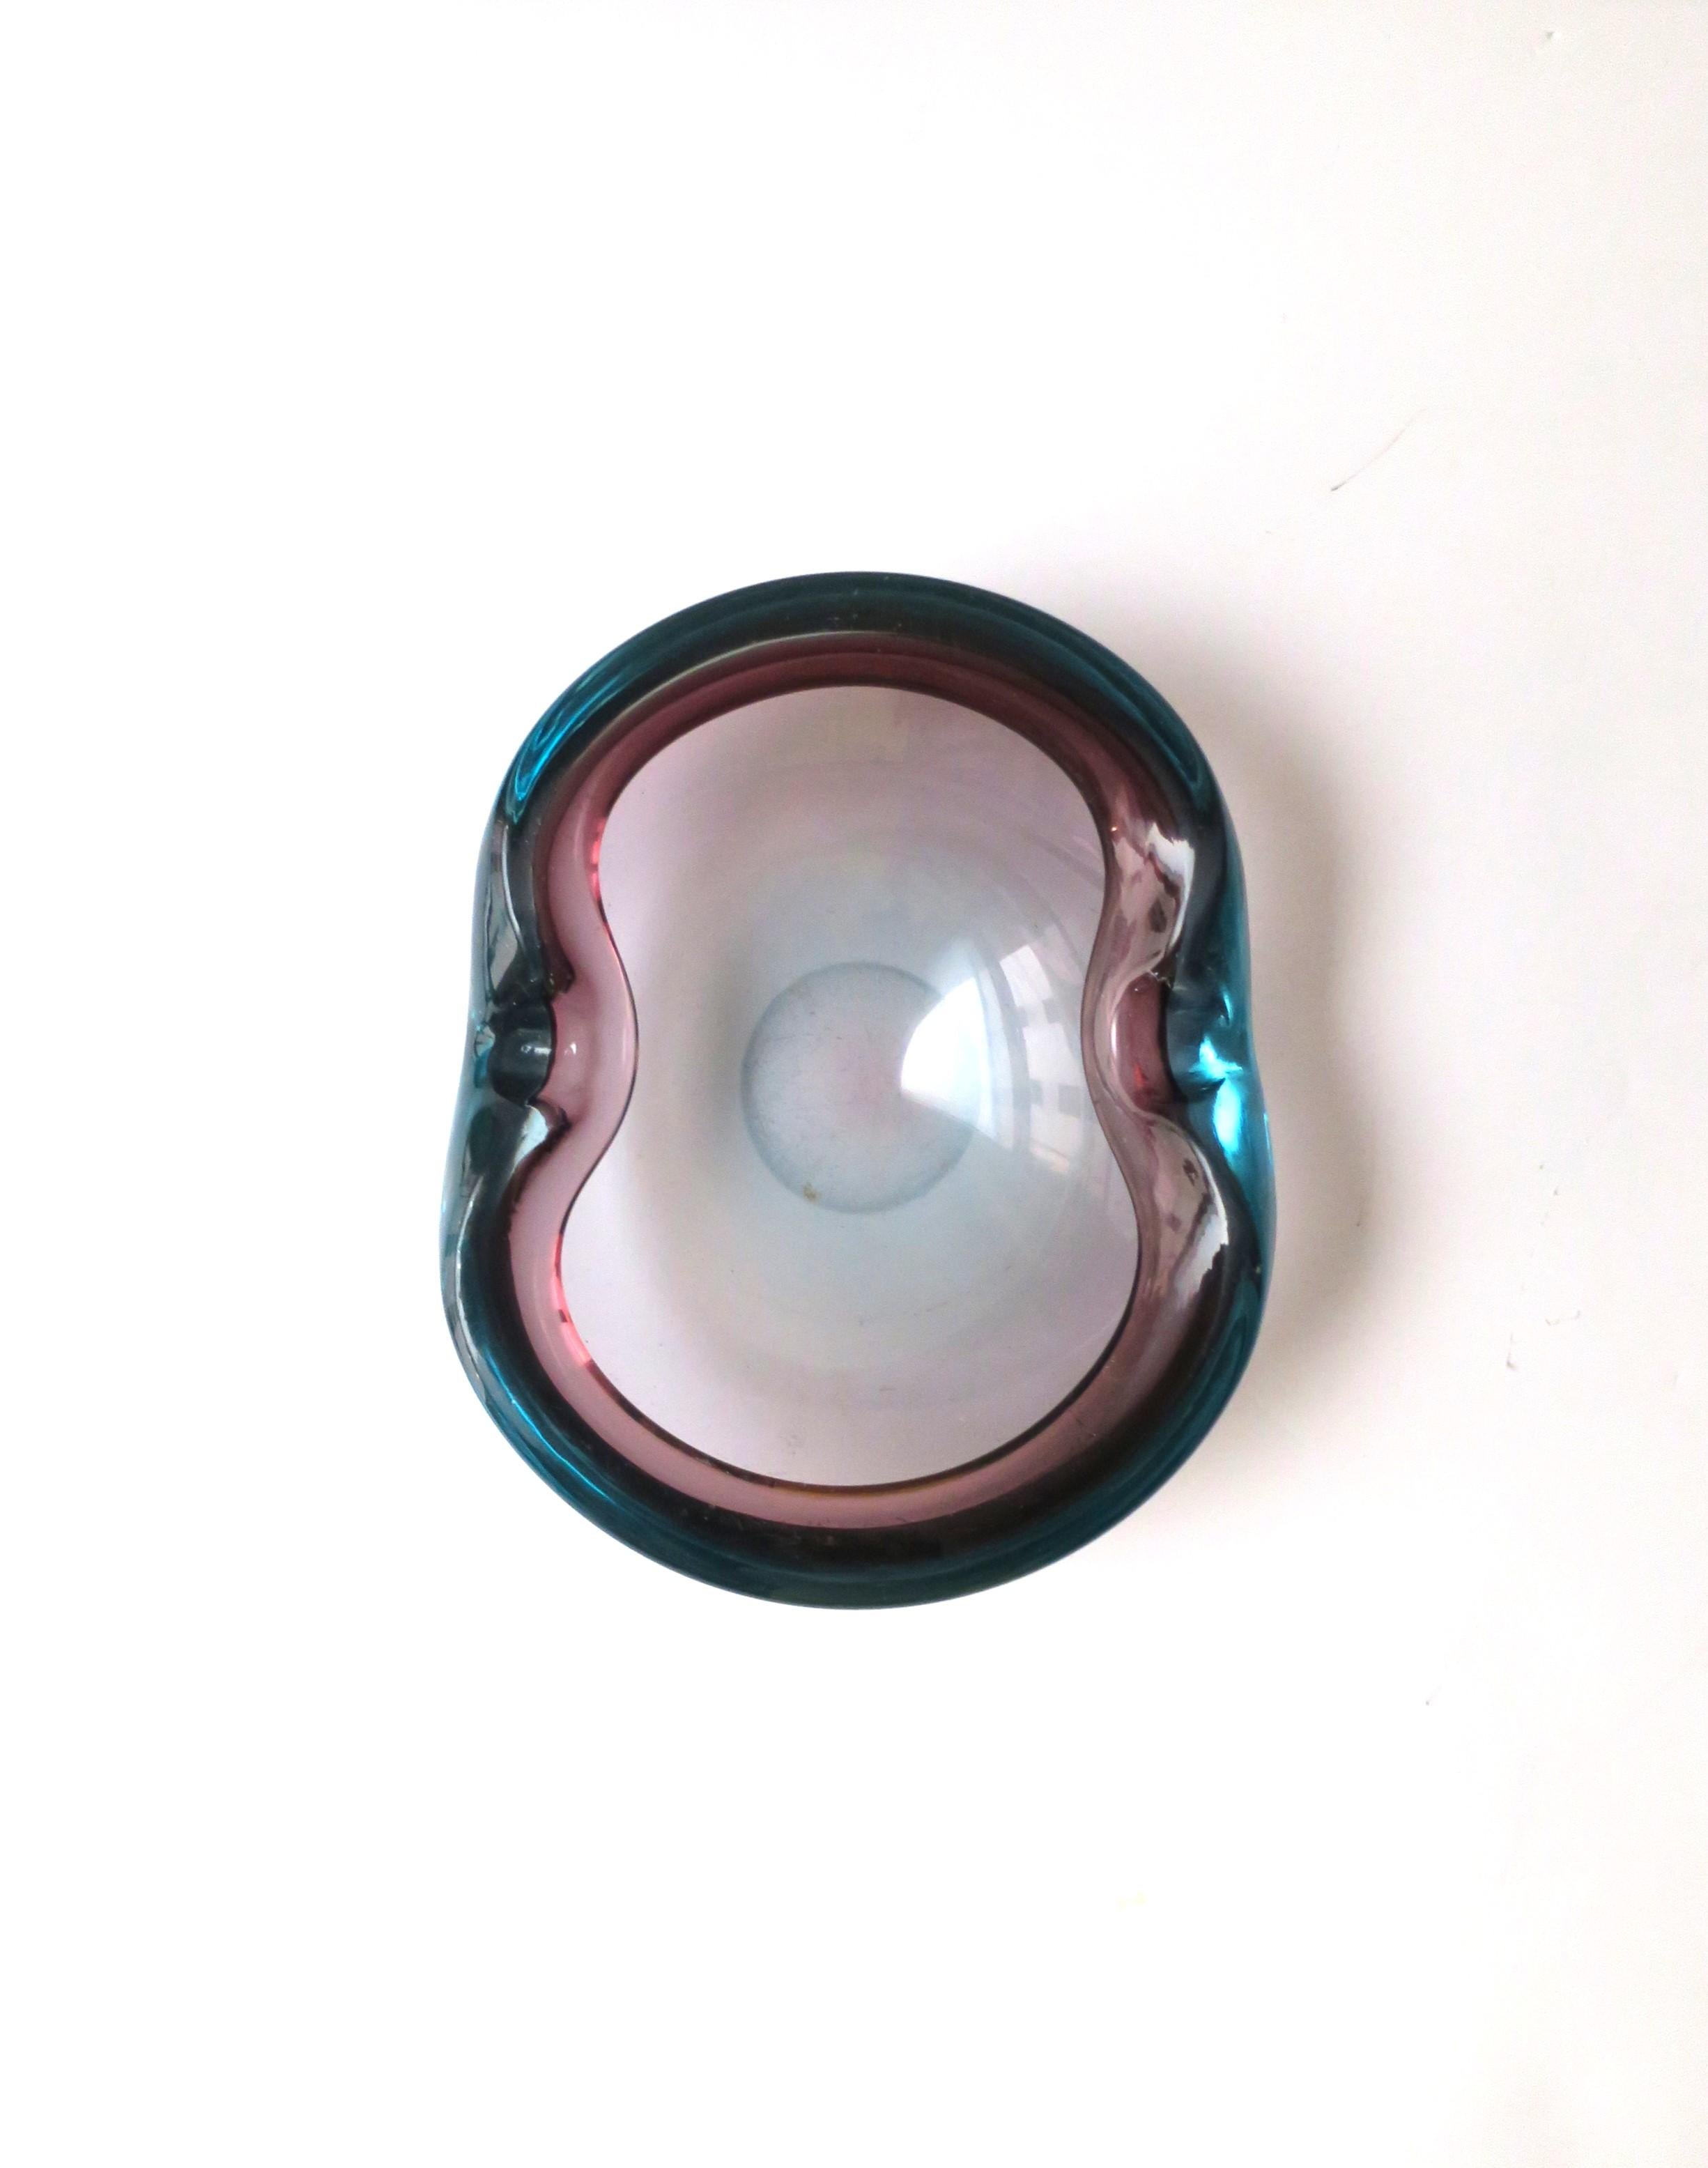 A substantial vintage Italian Murano hand blown Sommerso art glass bowl or ashtray in the style of artist Alfredo Barbini, Midcentury Modern period, circa 1950s, 1960s, Italy. Piece is blue and amythest art glass, oval in shape, with two indents on